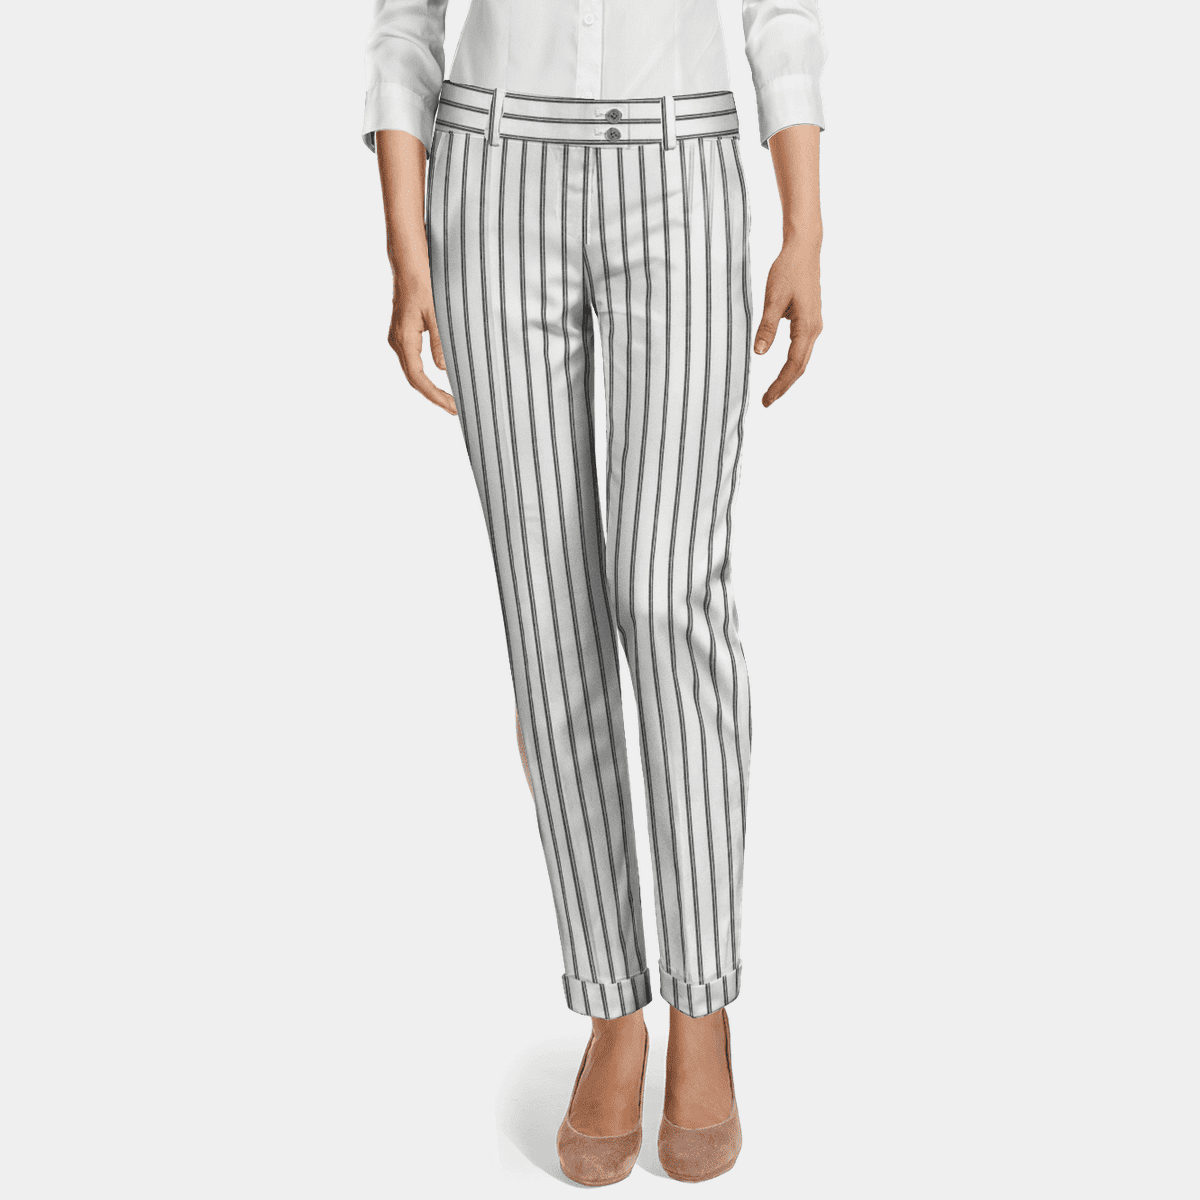 White striped Linen flat-front cuffed Cigarette Pants